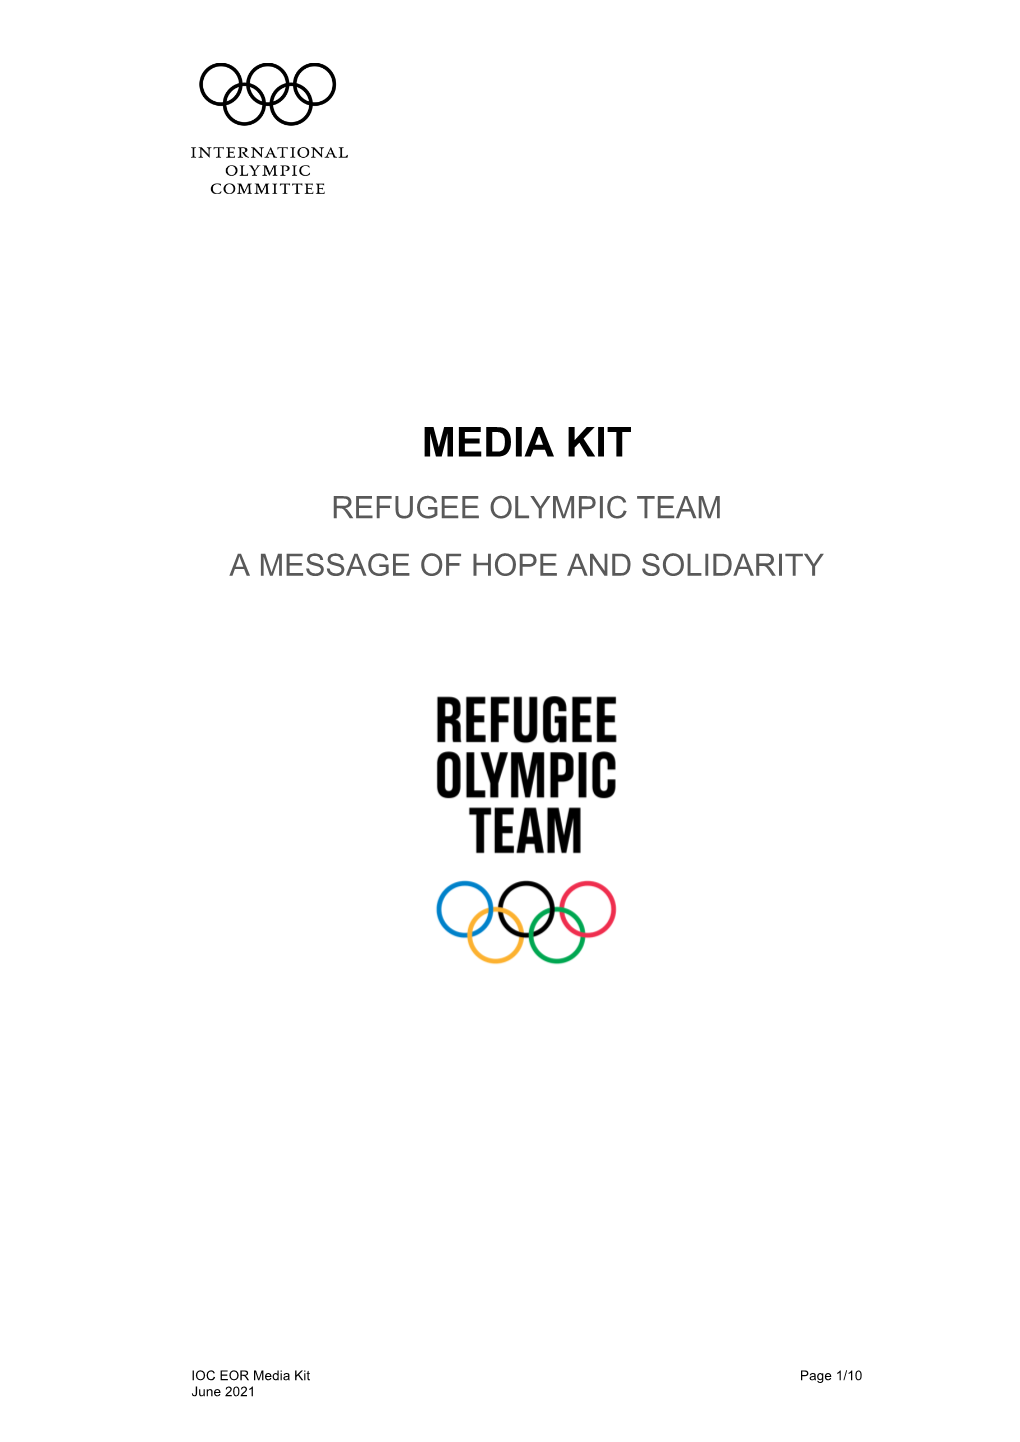 Refugee Olympic Team a Message of Hope and Solidarity